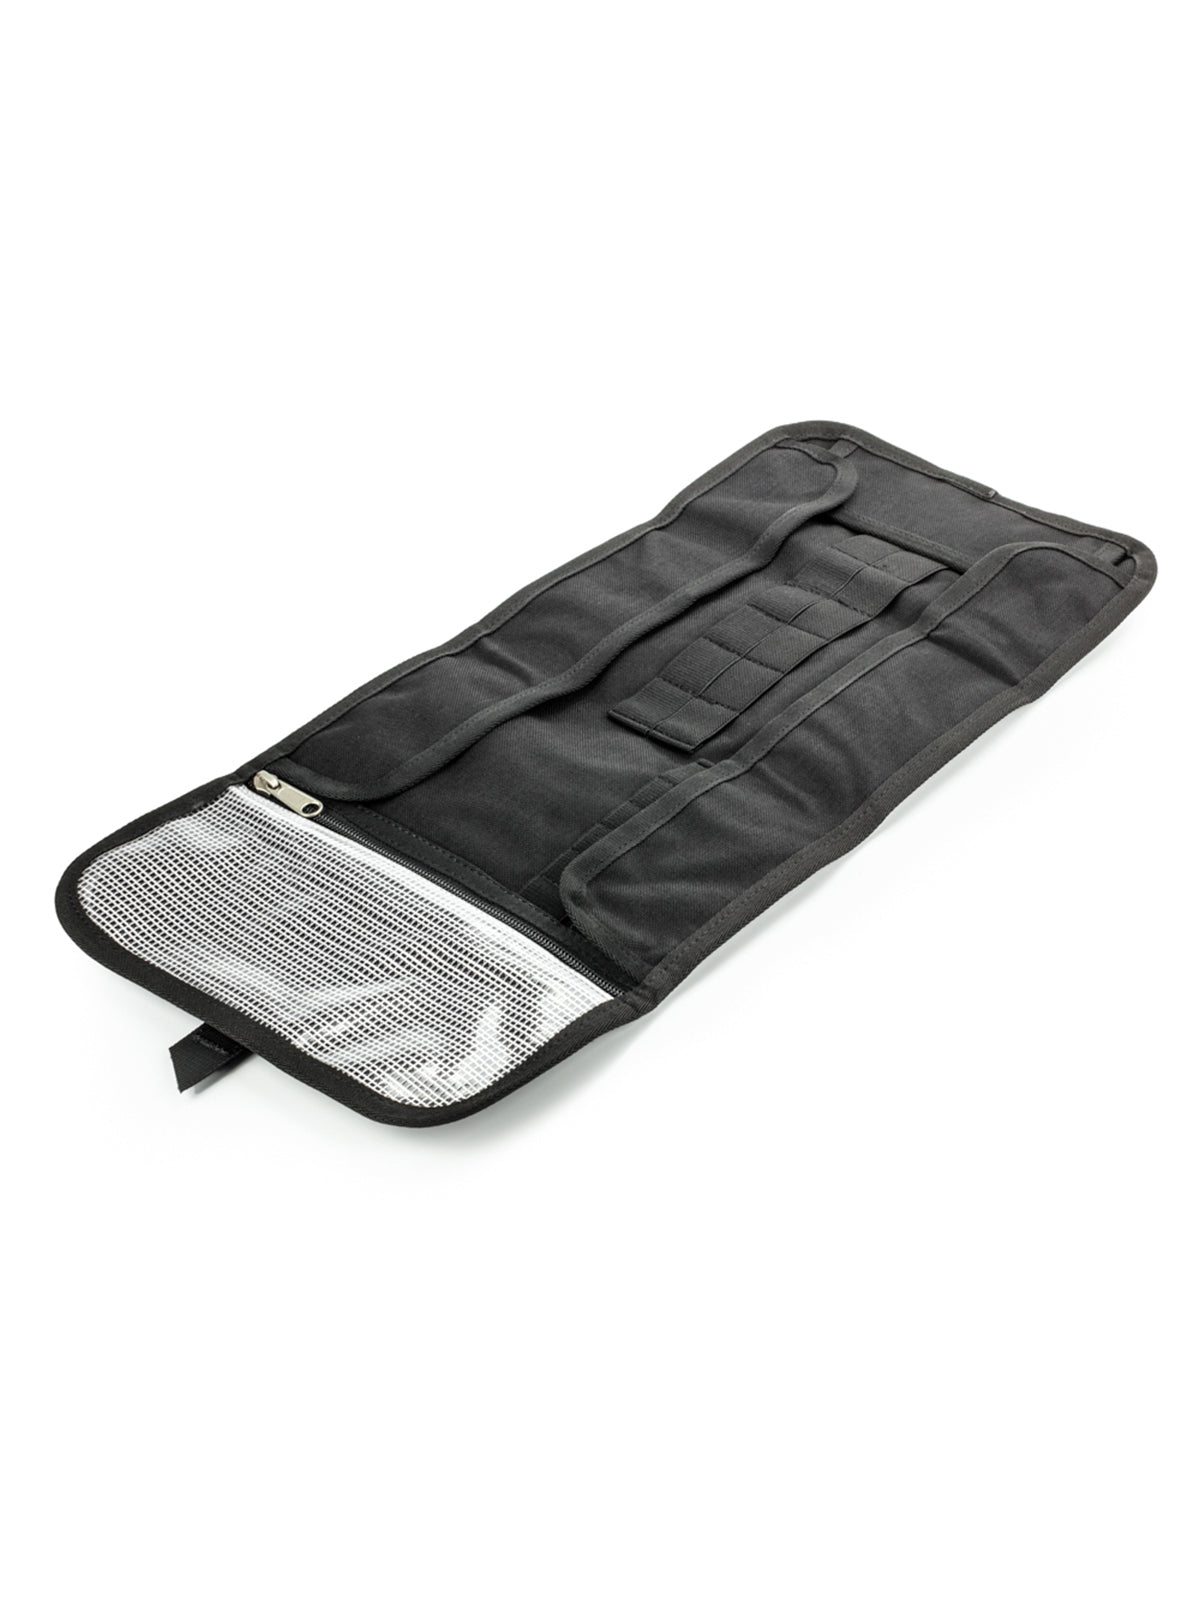 Kriega Tool Roll open with no tools